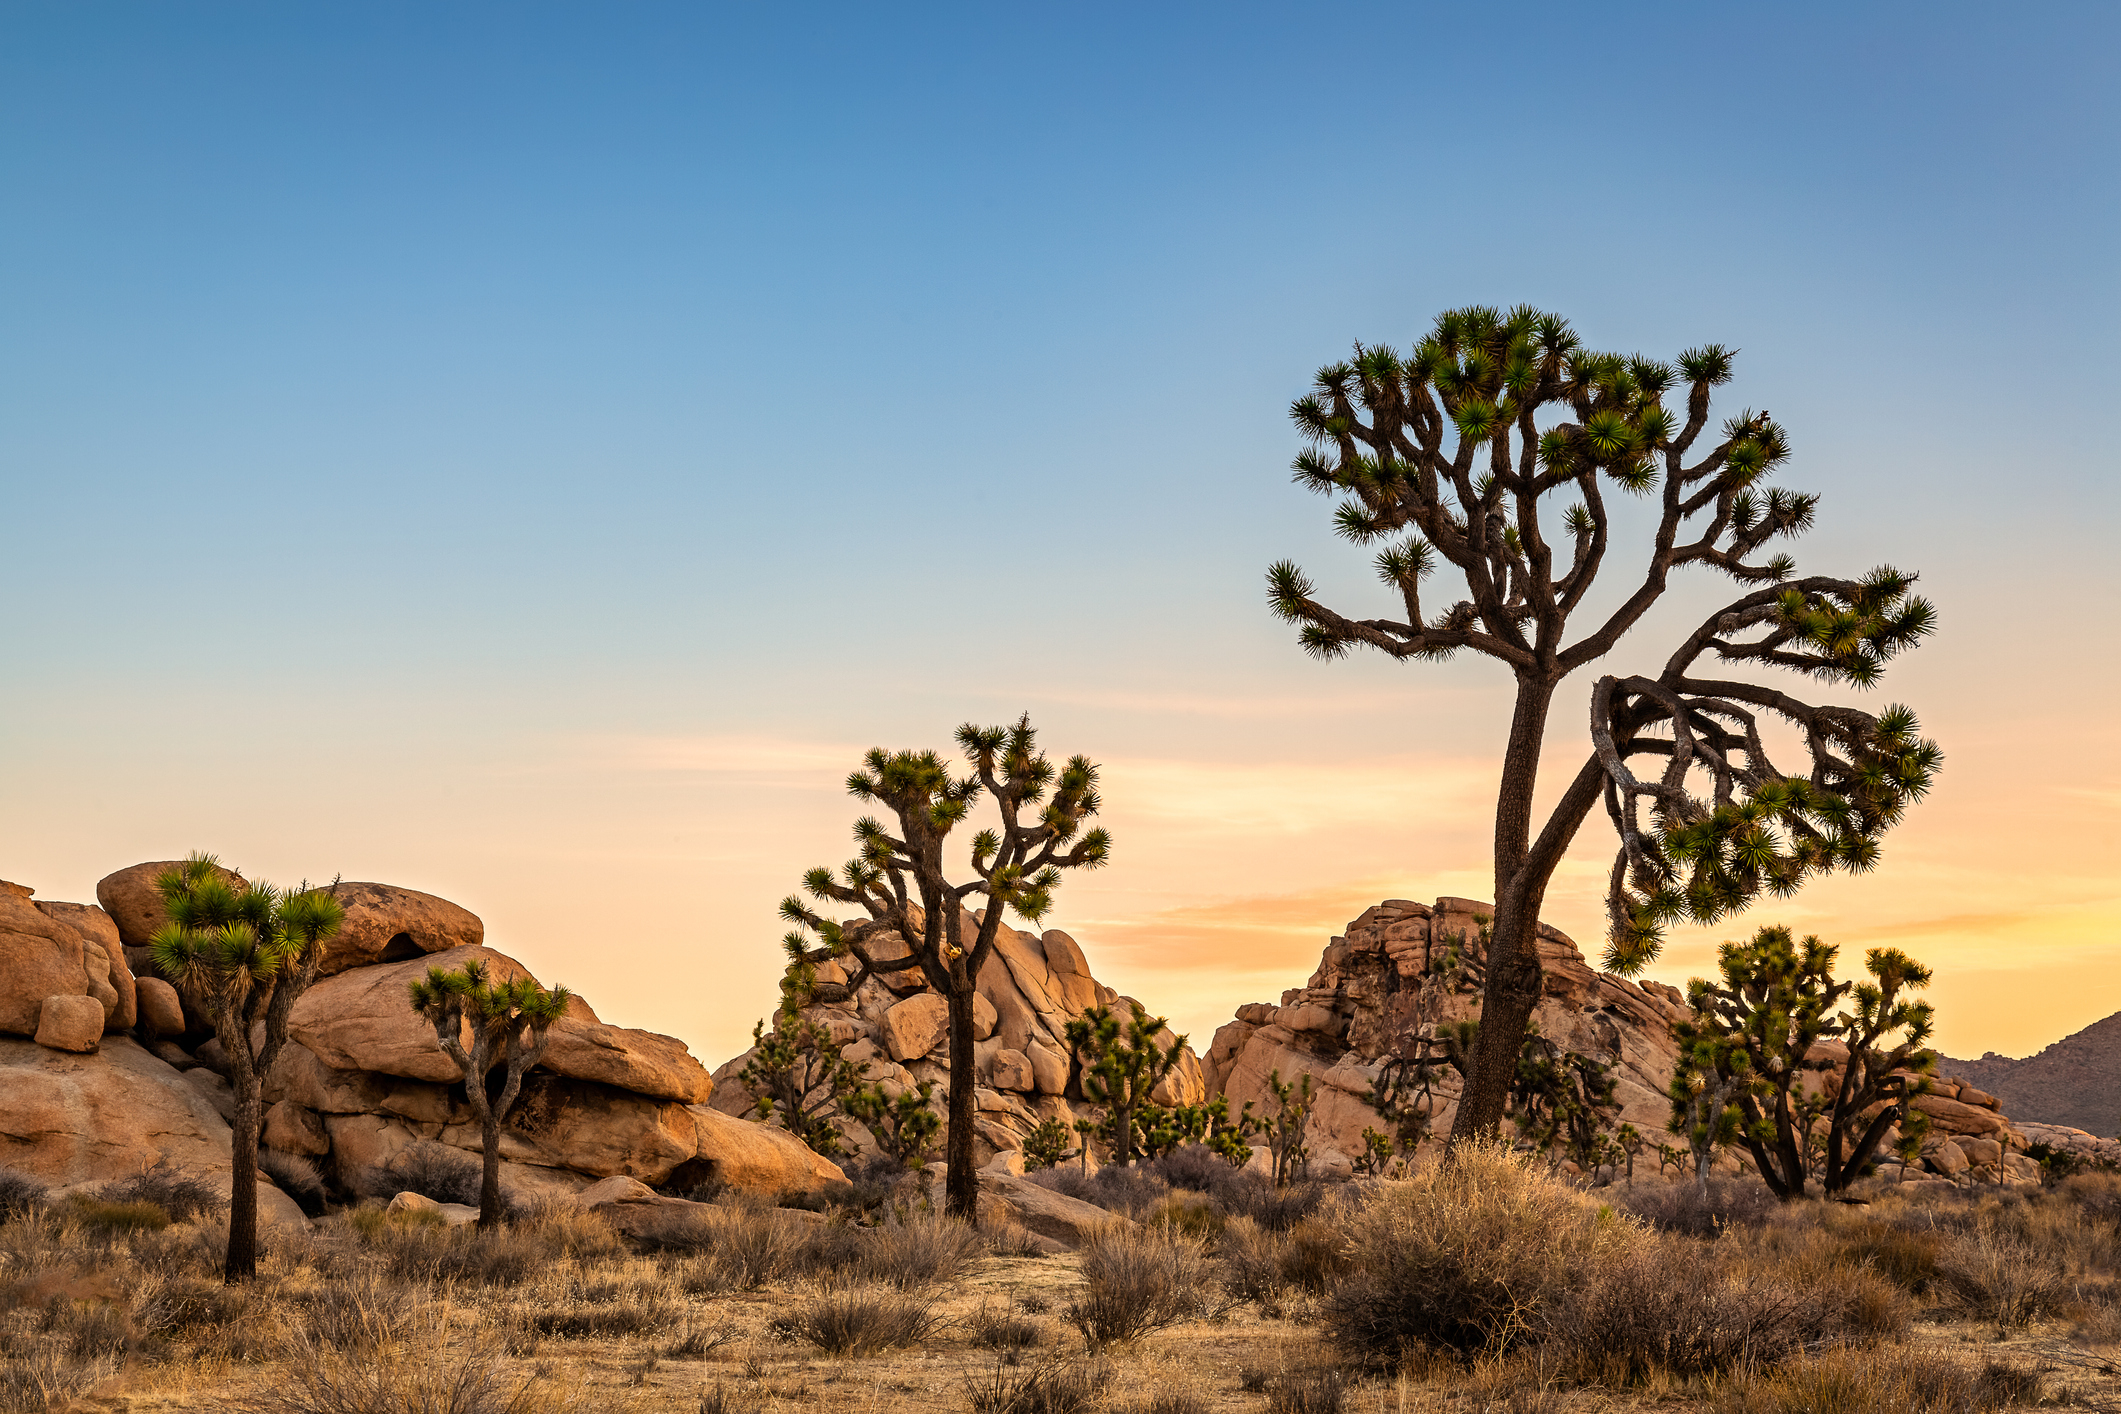 Joshua trees with rocky outcrops in a desert landscape at dusk